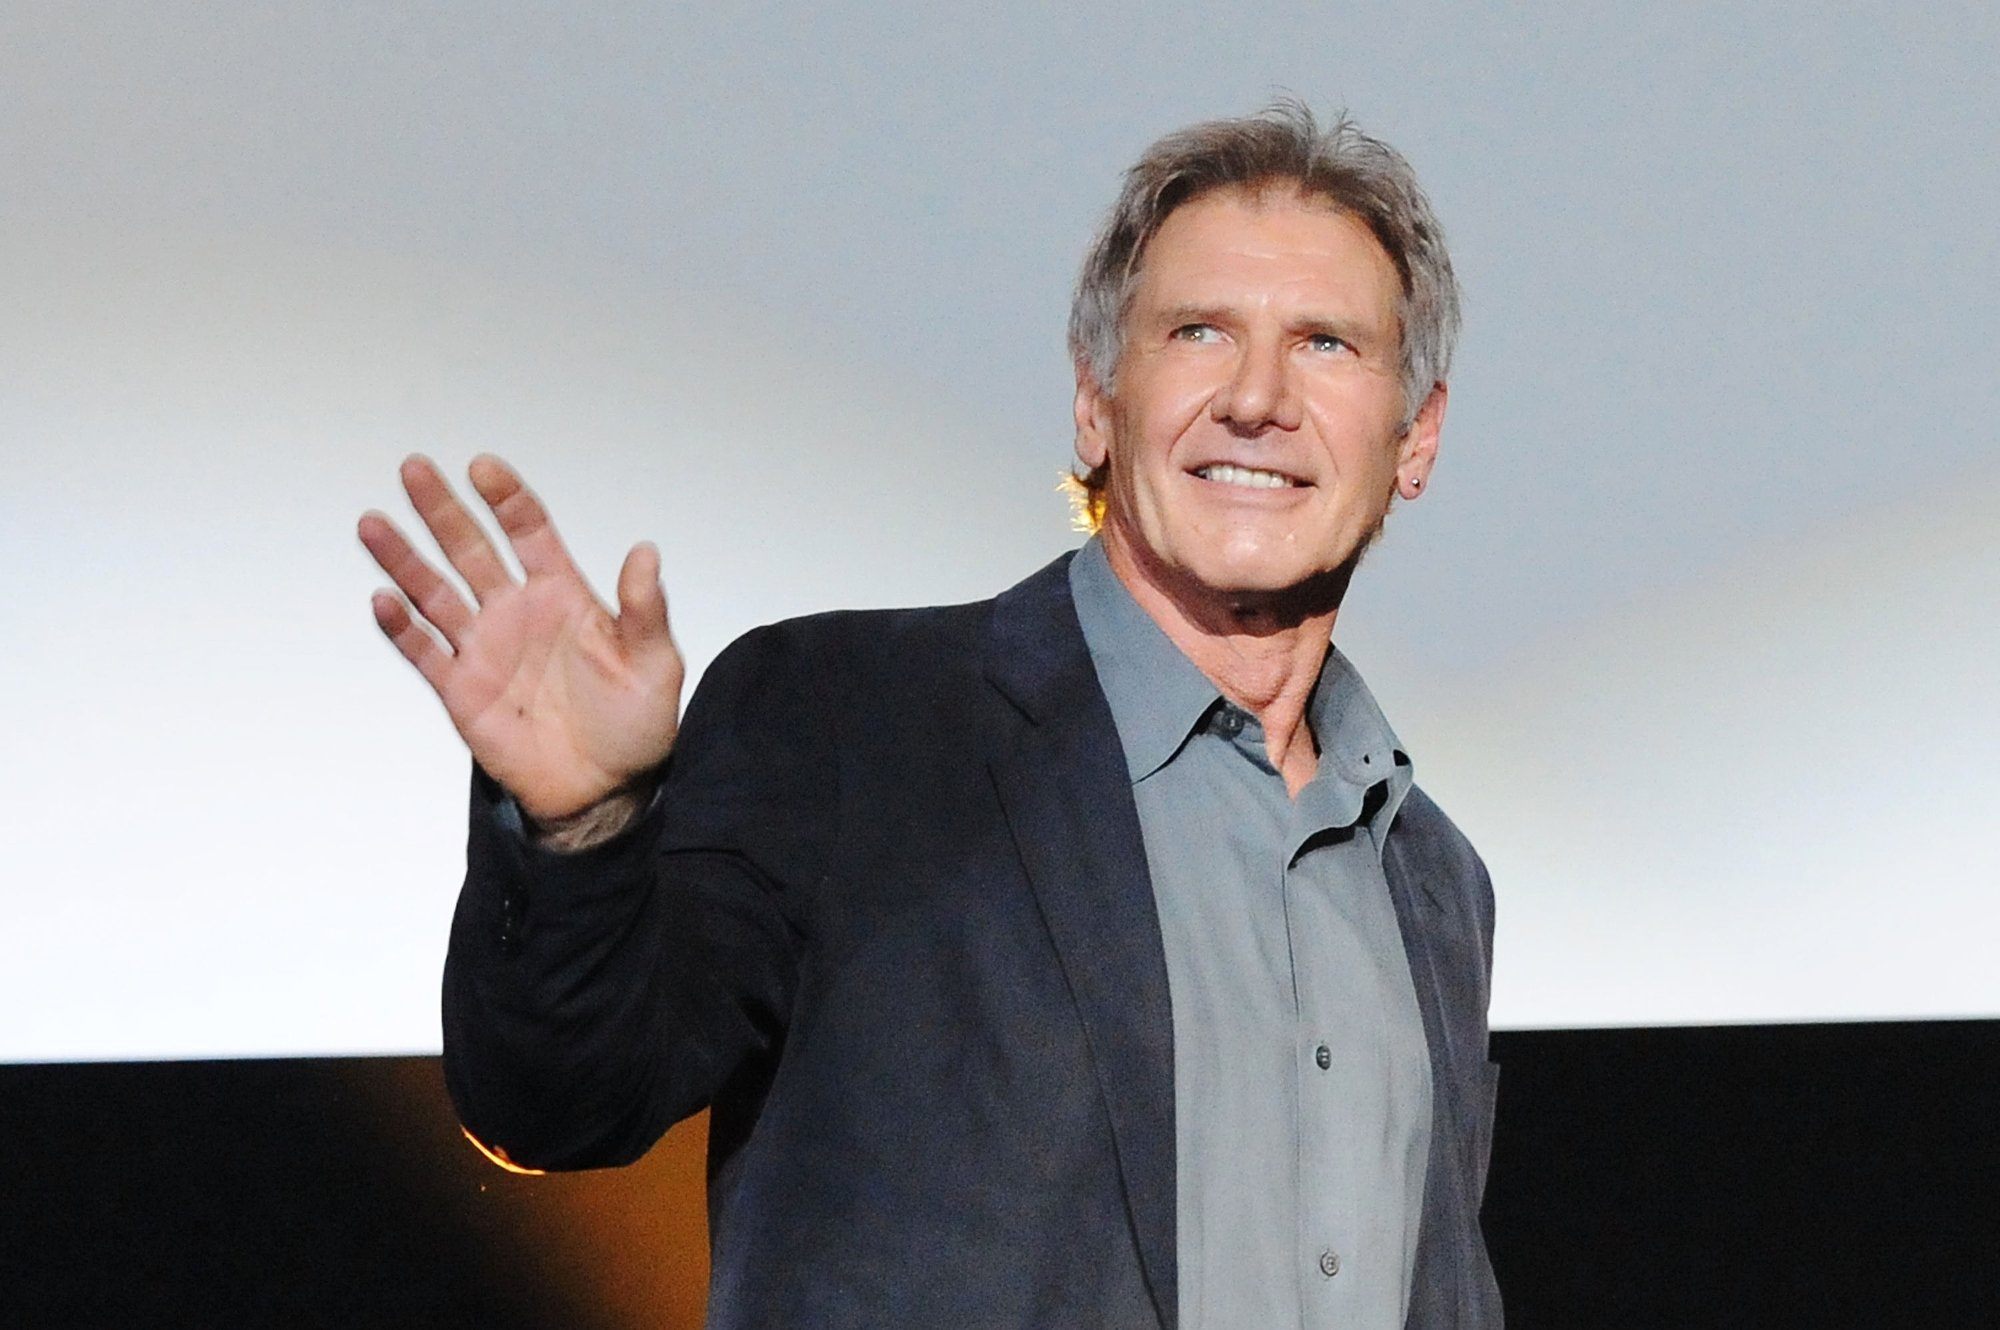 'Gunsmoke' guest star Harrison Ford. He's holding up his hand waving in front of a silver screen, wearing a collared shirt and suit jacket